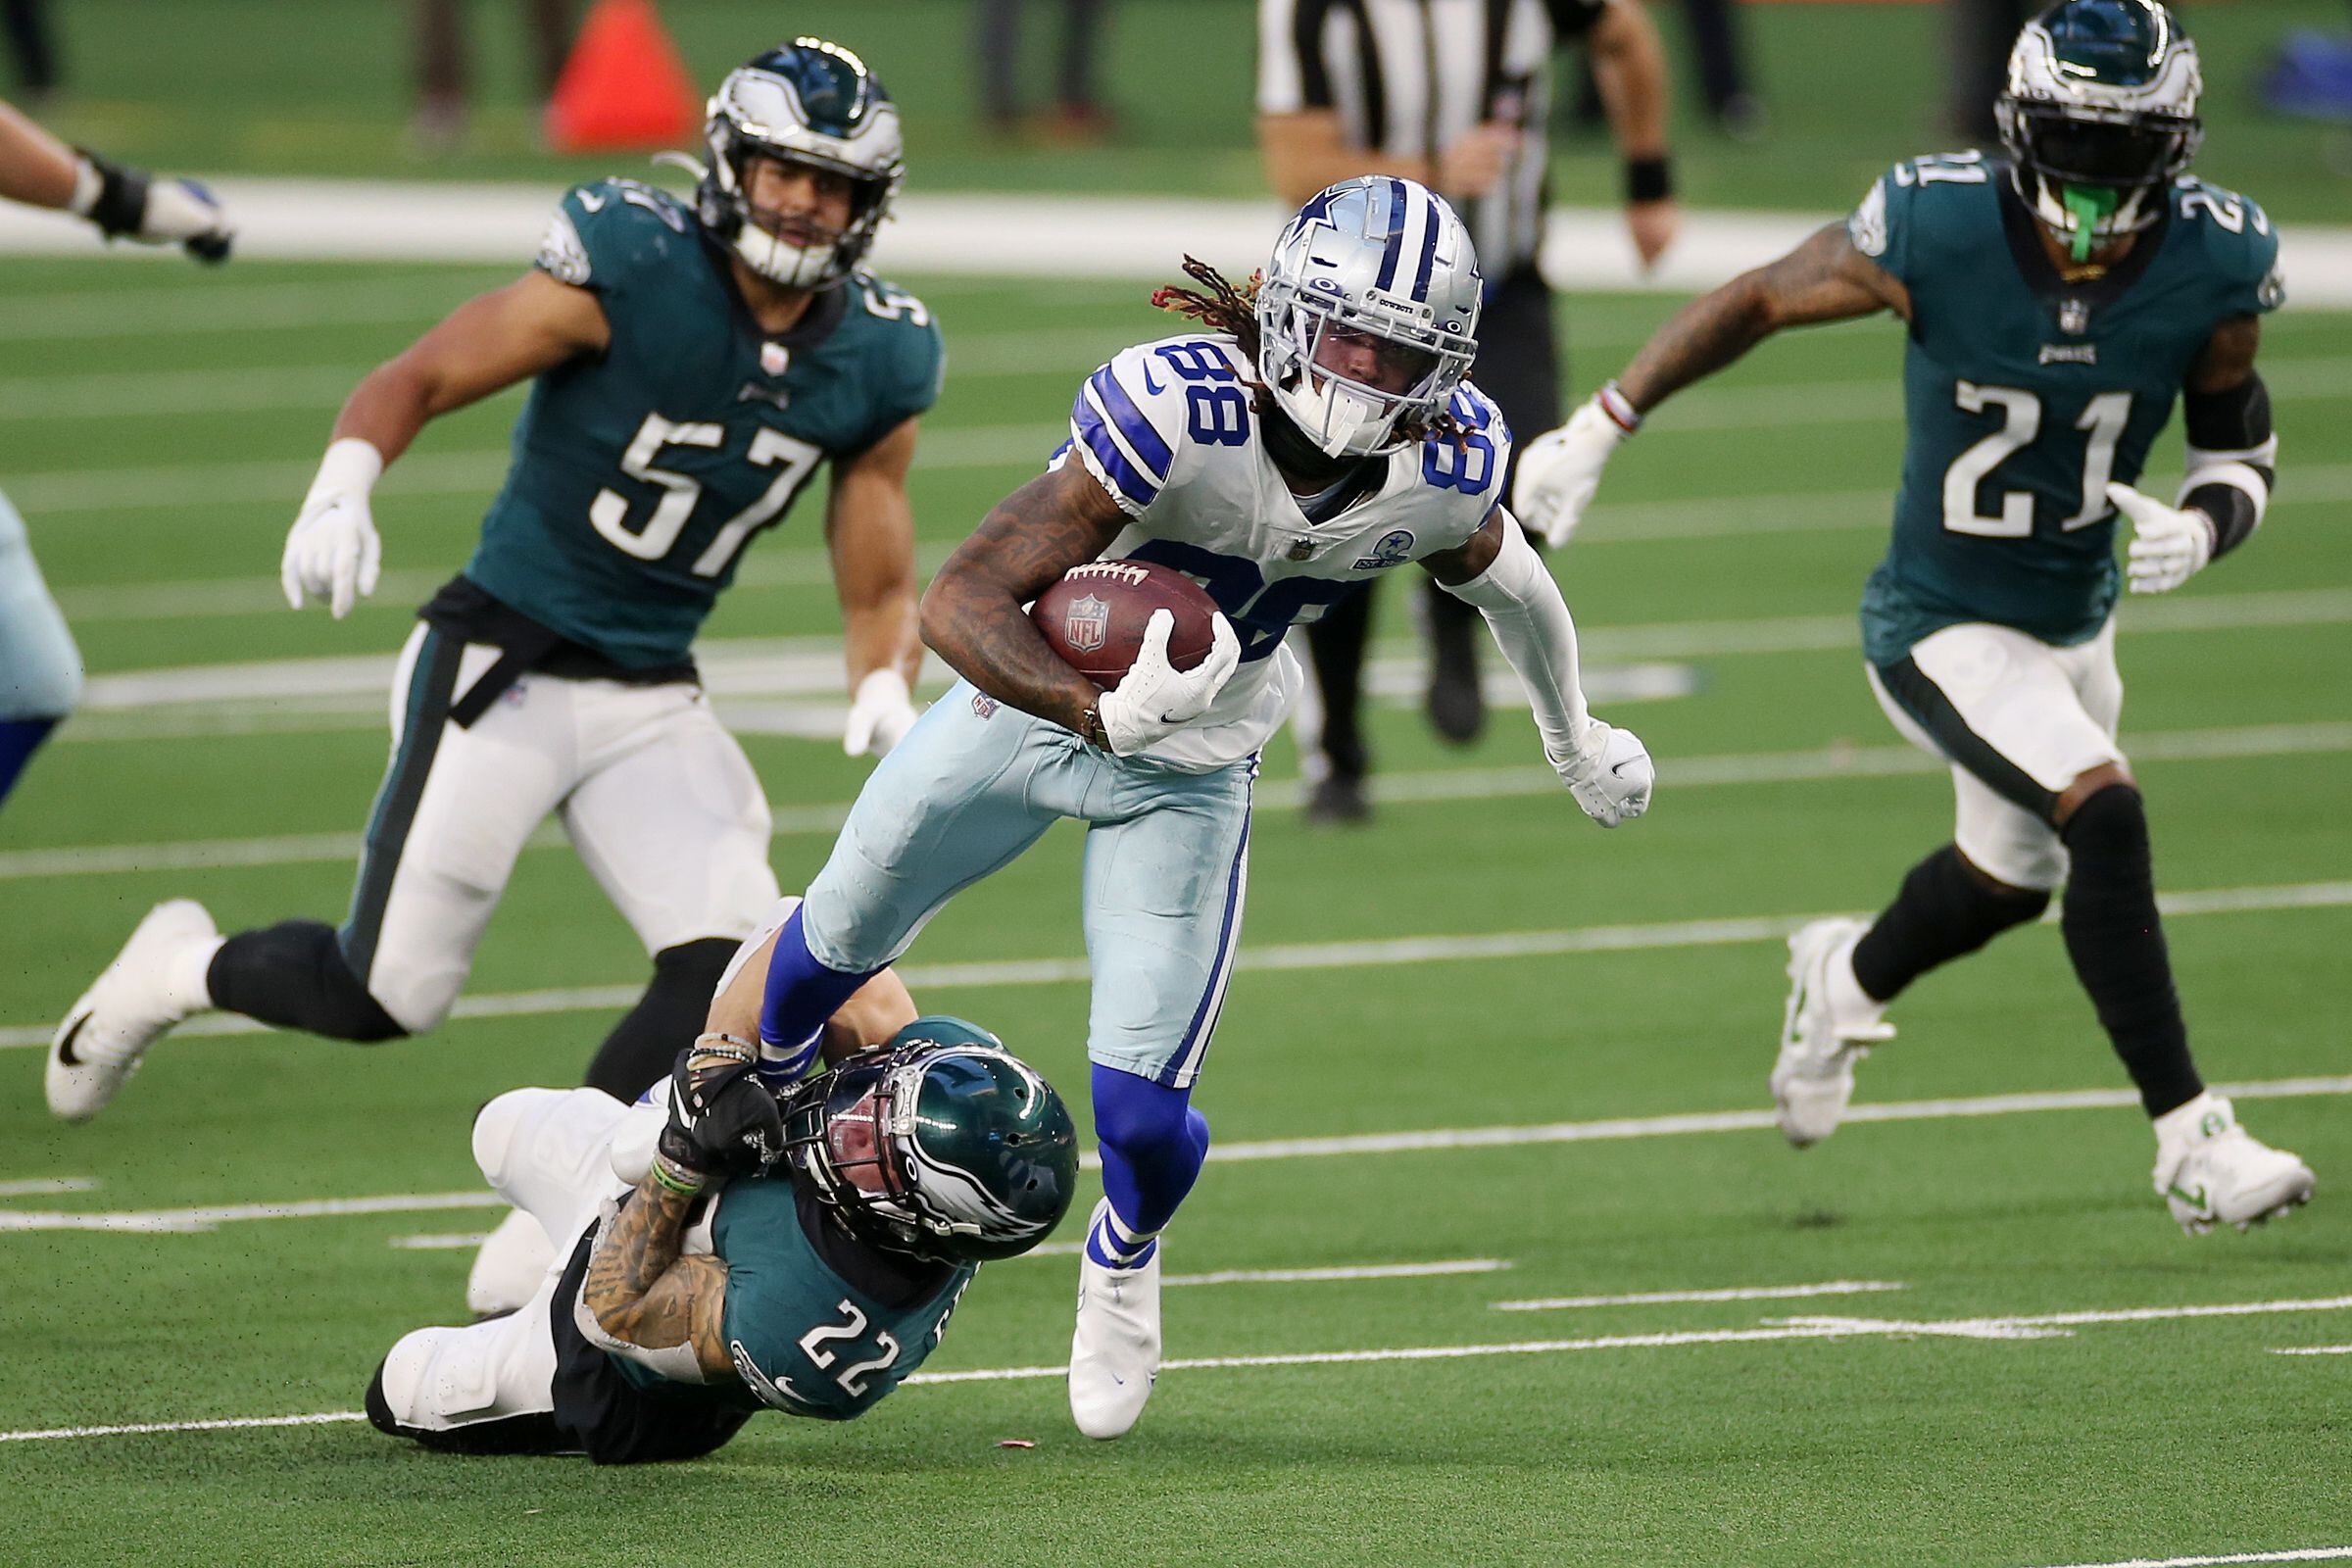 State of the NFC East: Eagles writer says the Dallas Cowboys are